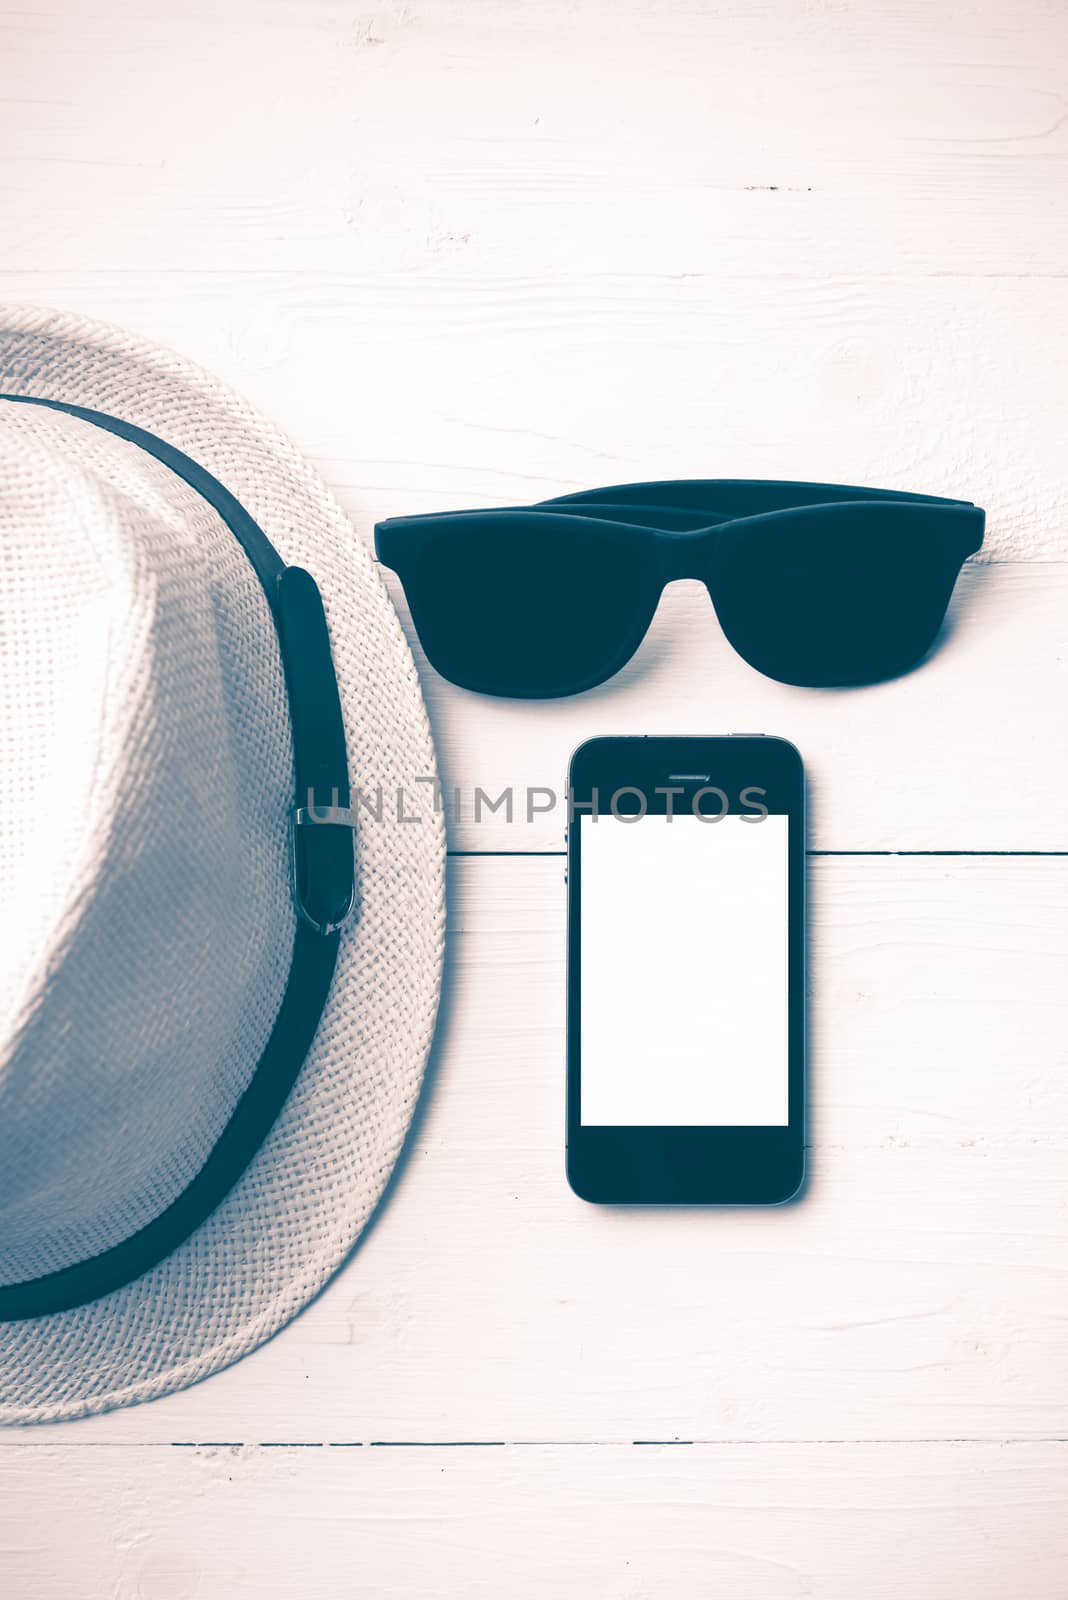 hat sunglasses and smart phone vintage style by ammza12